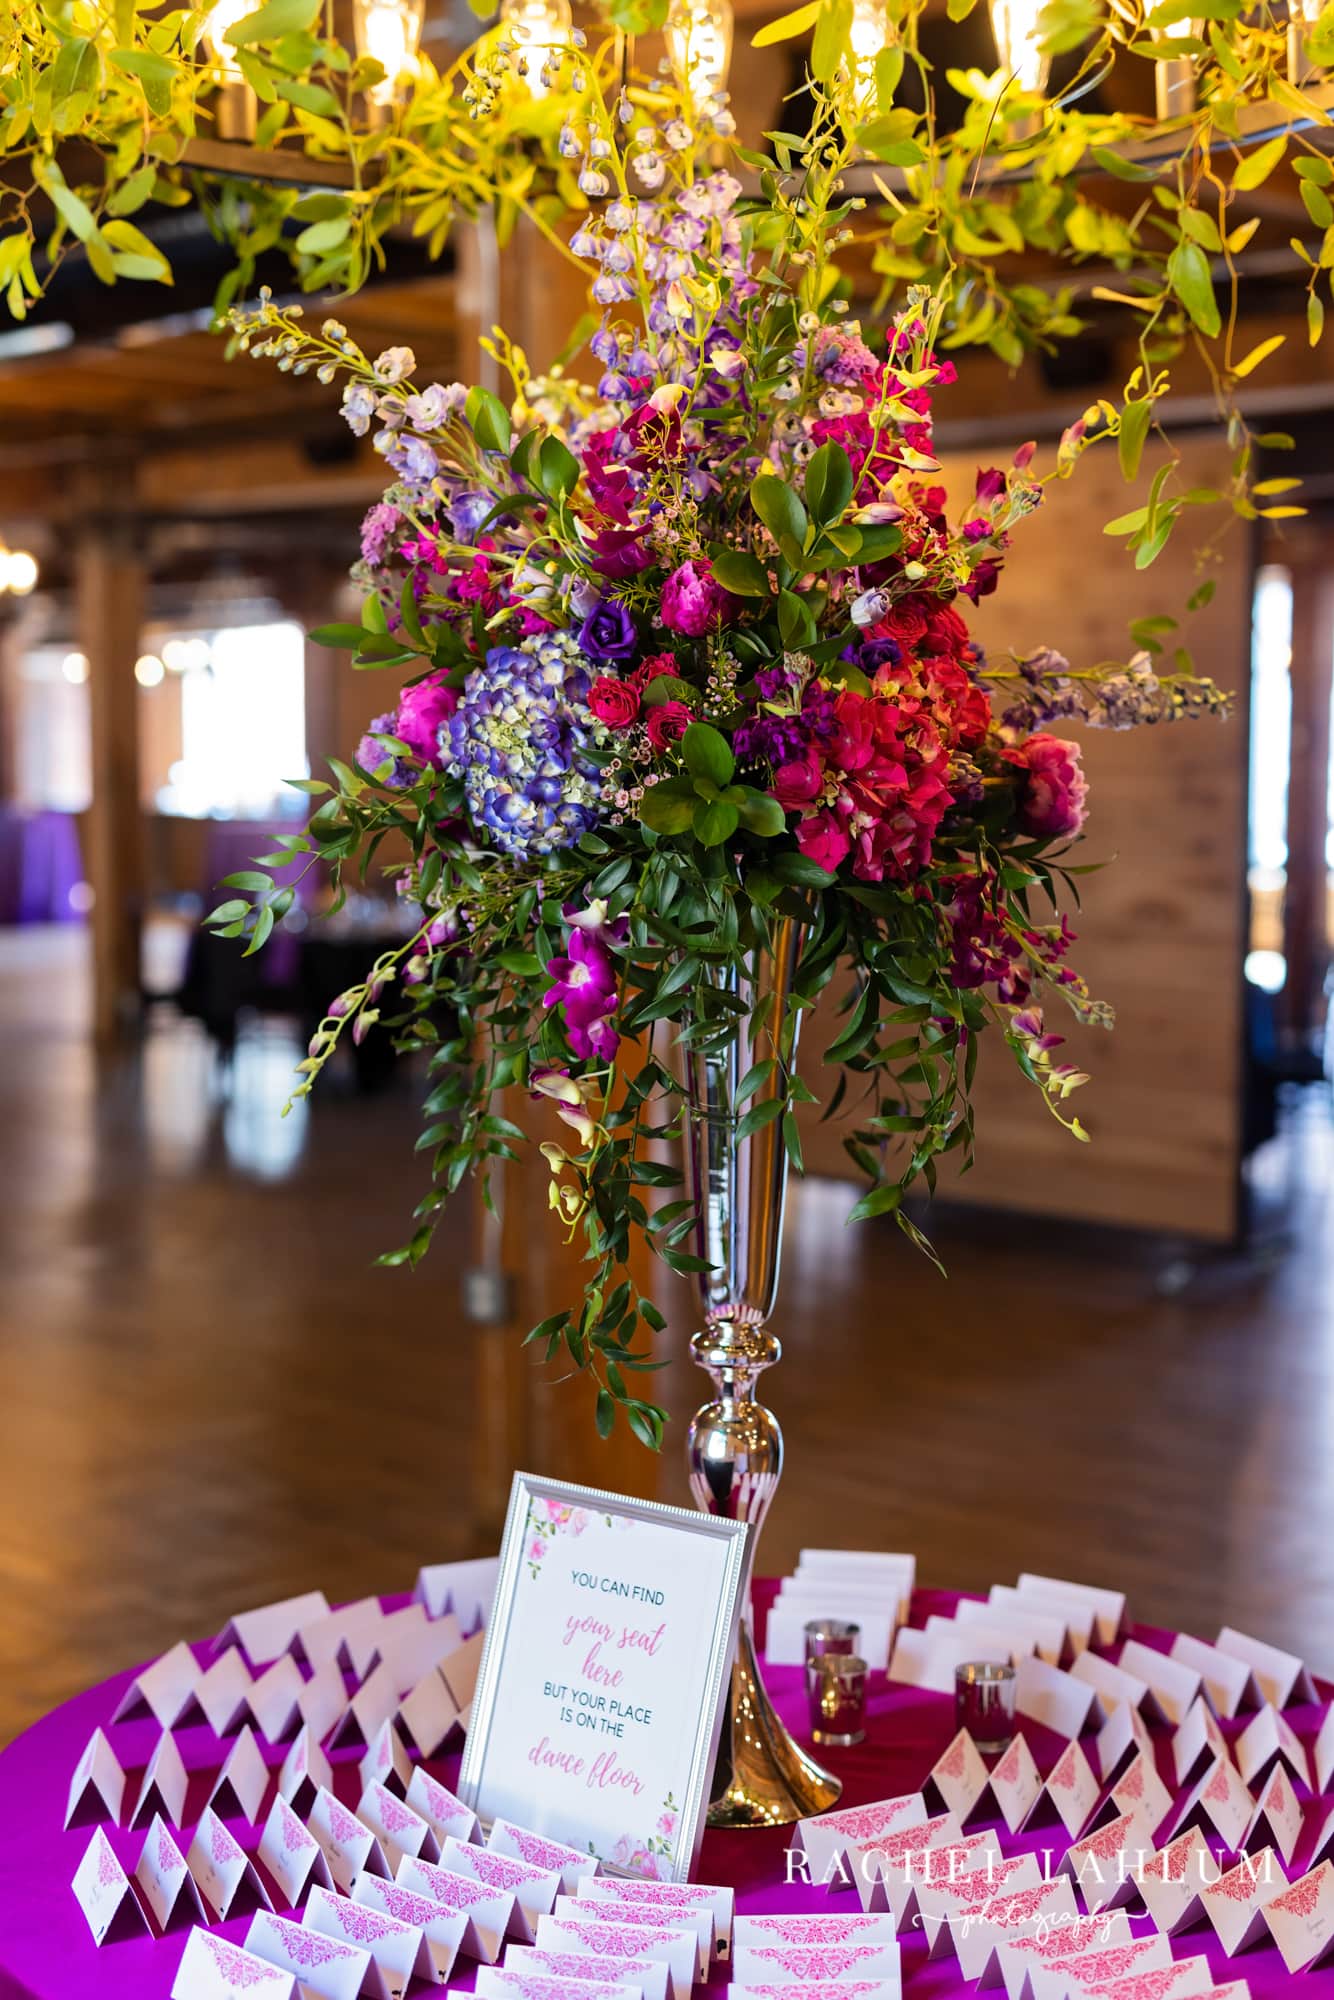 Place cards surround a bouquet of flowers at the wedding reception.